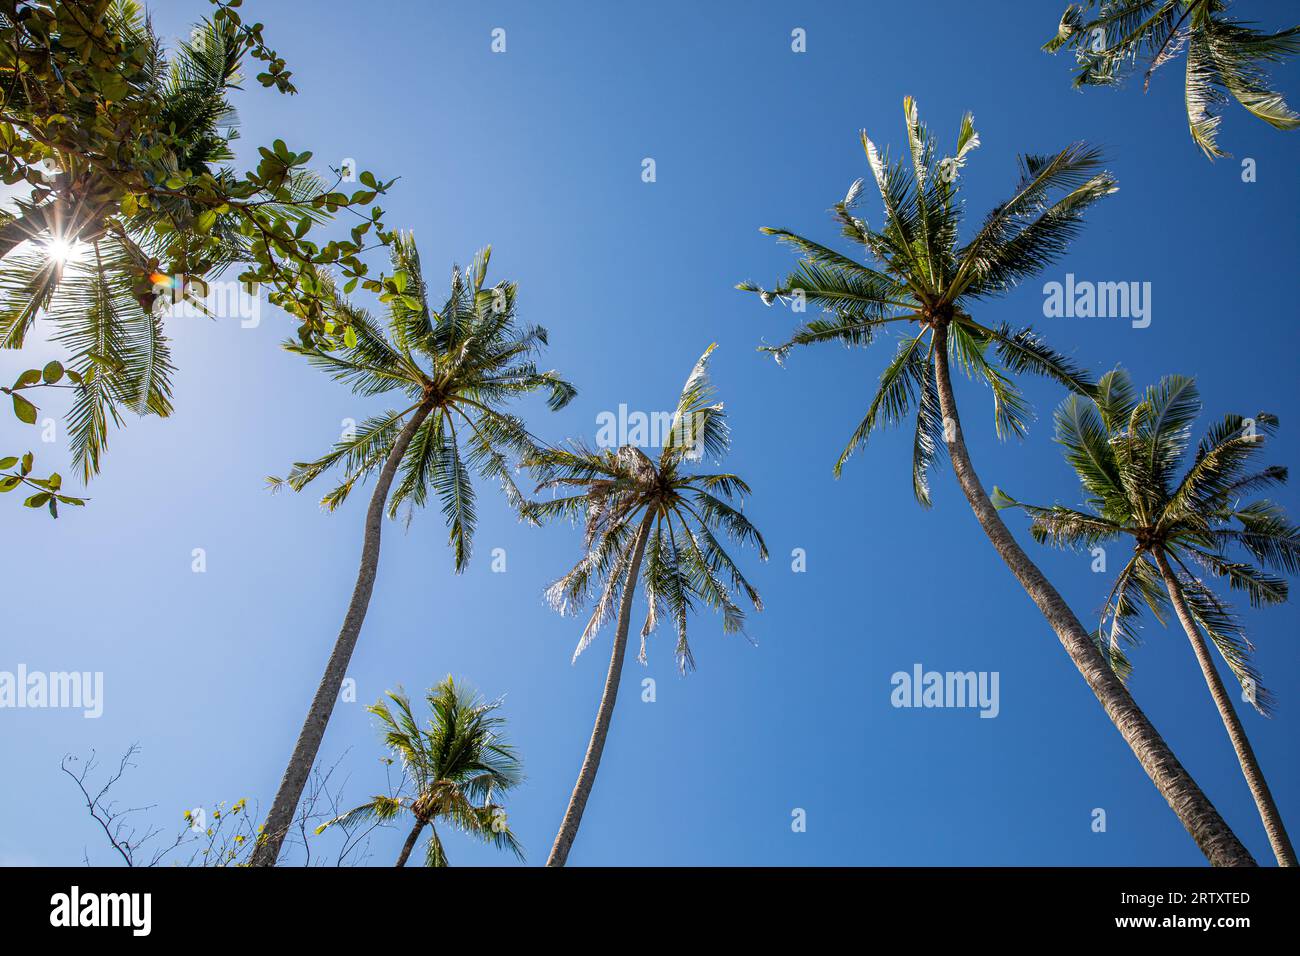 Coconut Palm Tree and Blue Sky, Koh Chang Island, Thailand. Stock Photo